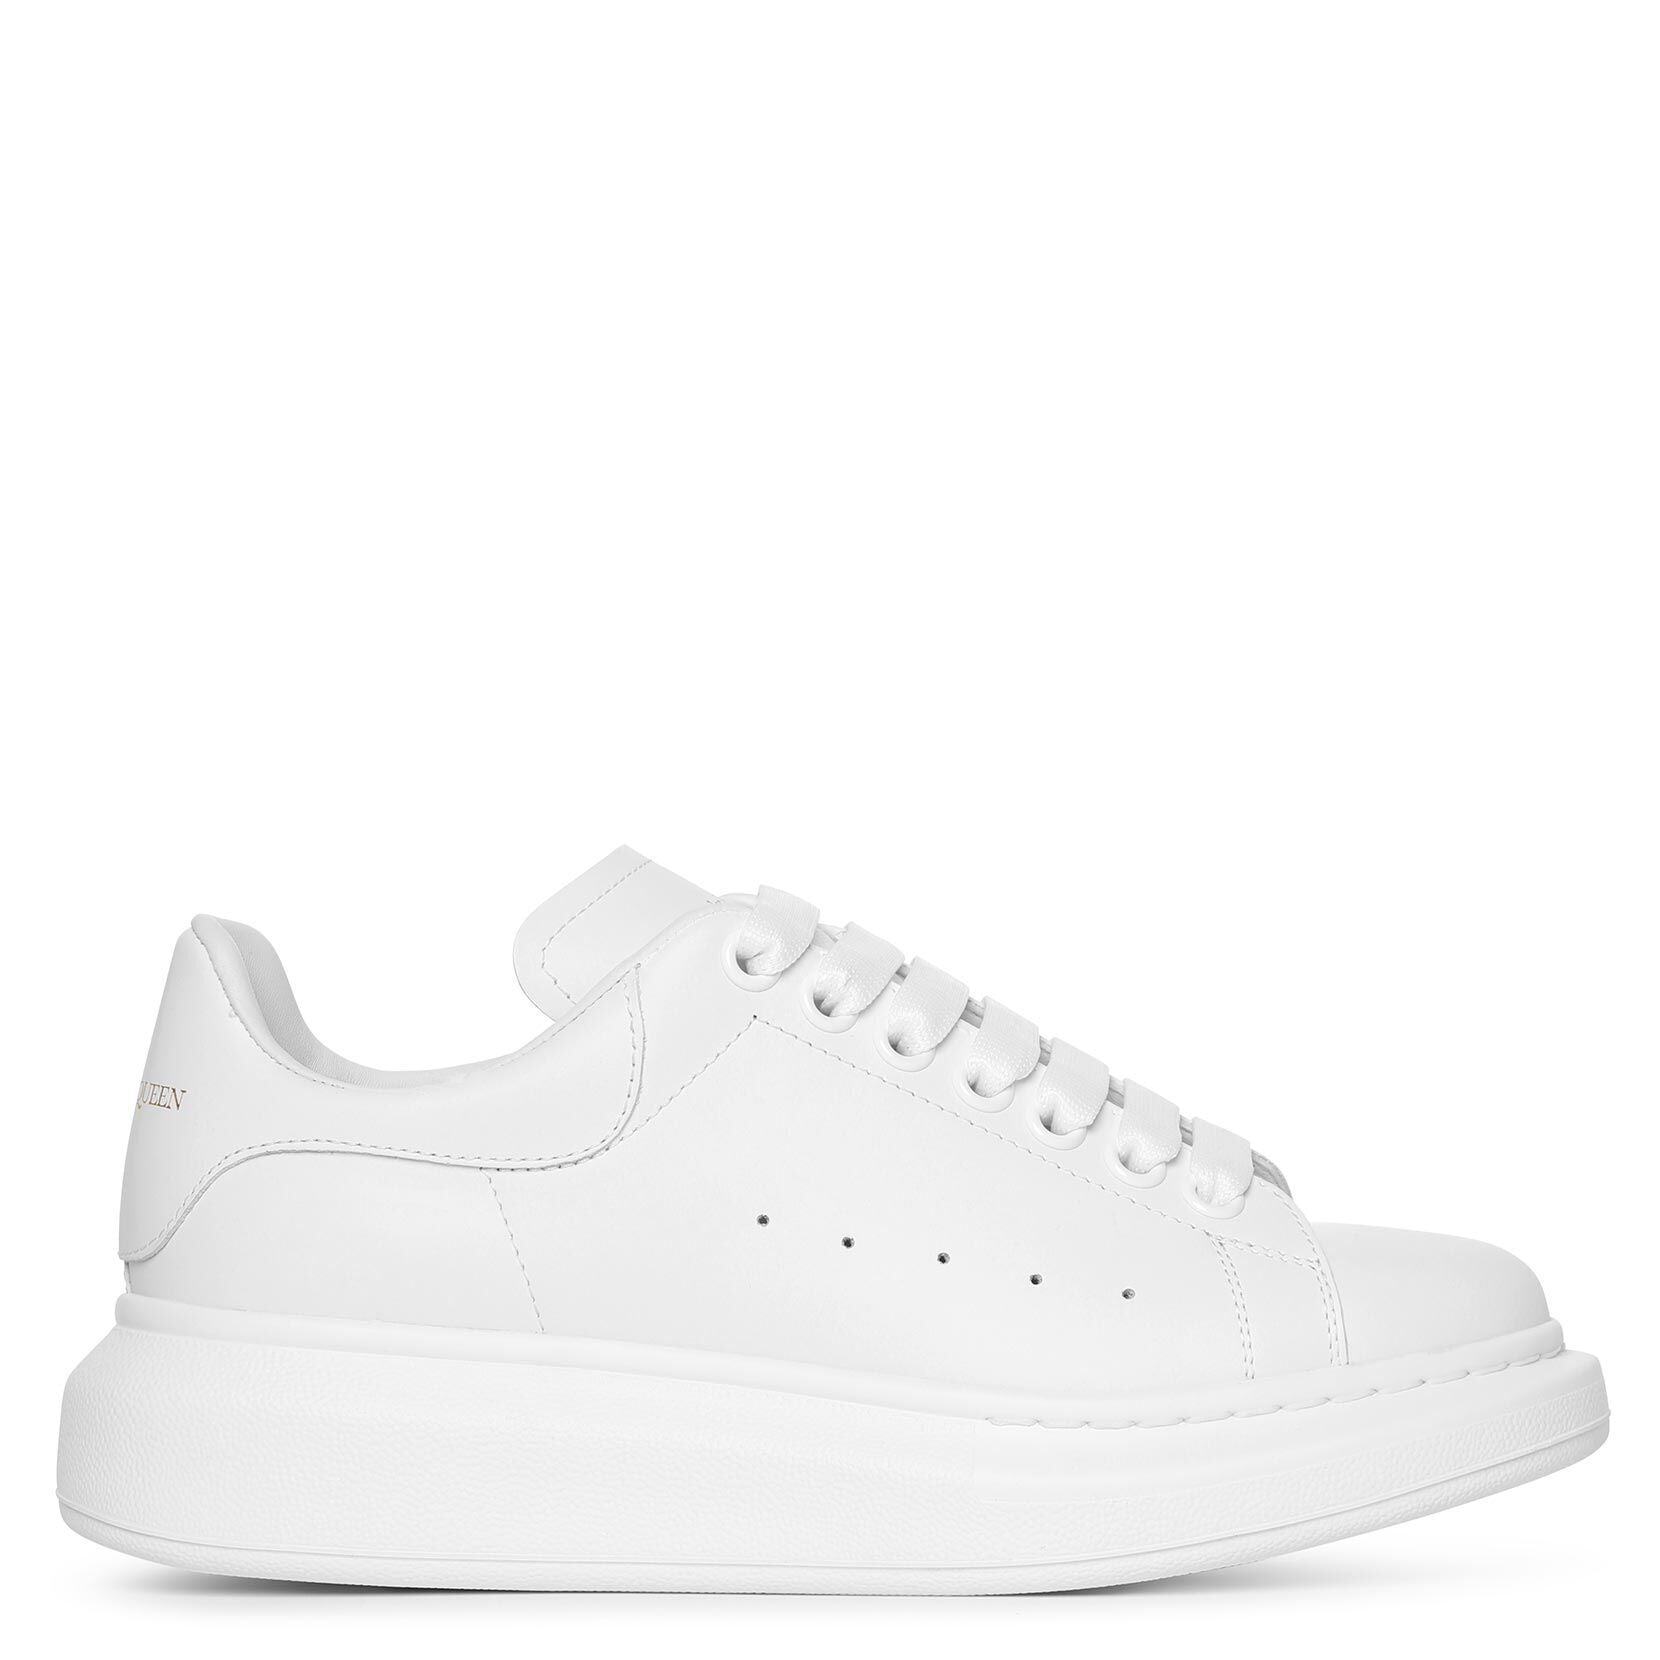 White and white classic sneakers